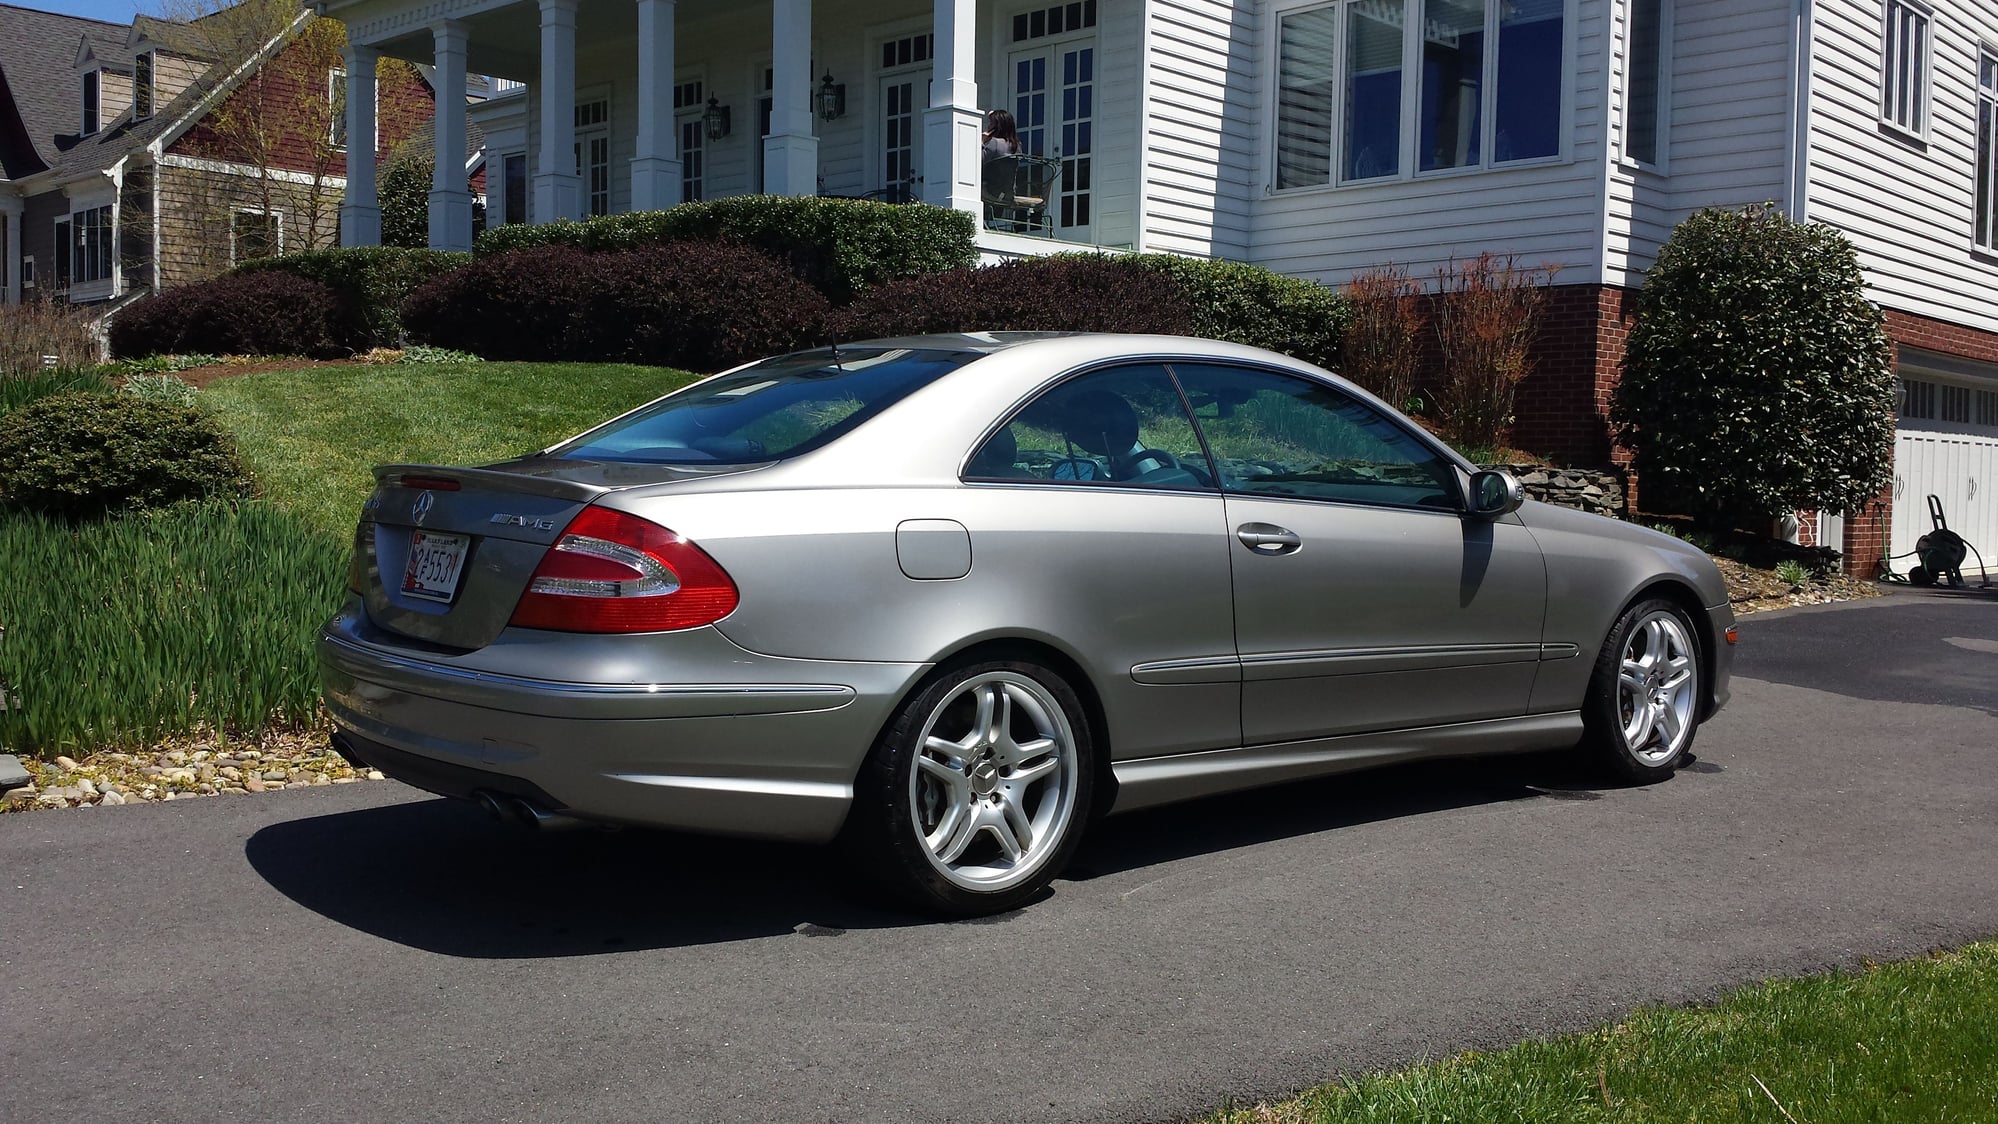 2005 Mercedes-Benz CL55 AMG - FS: 2005 CLK55 AMG - Used - VIN WDBTJ76HX5F135571 - 8 cyl - 2WD - Automatic - Coupe - Gray - Annapolis, MD 21403, United States